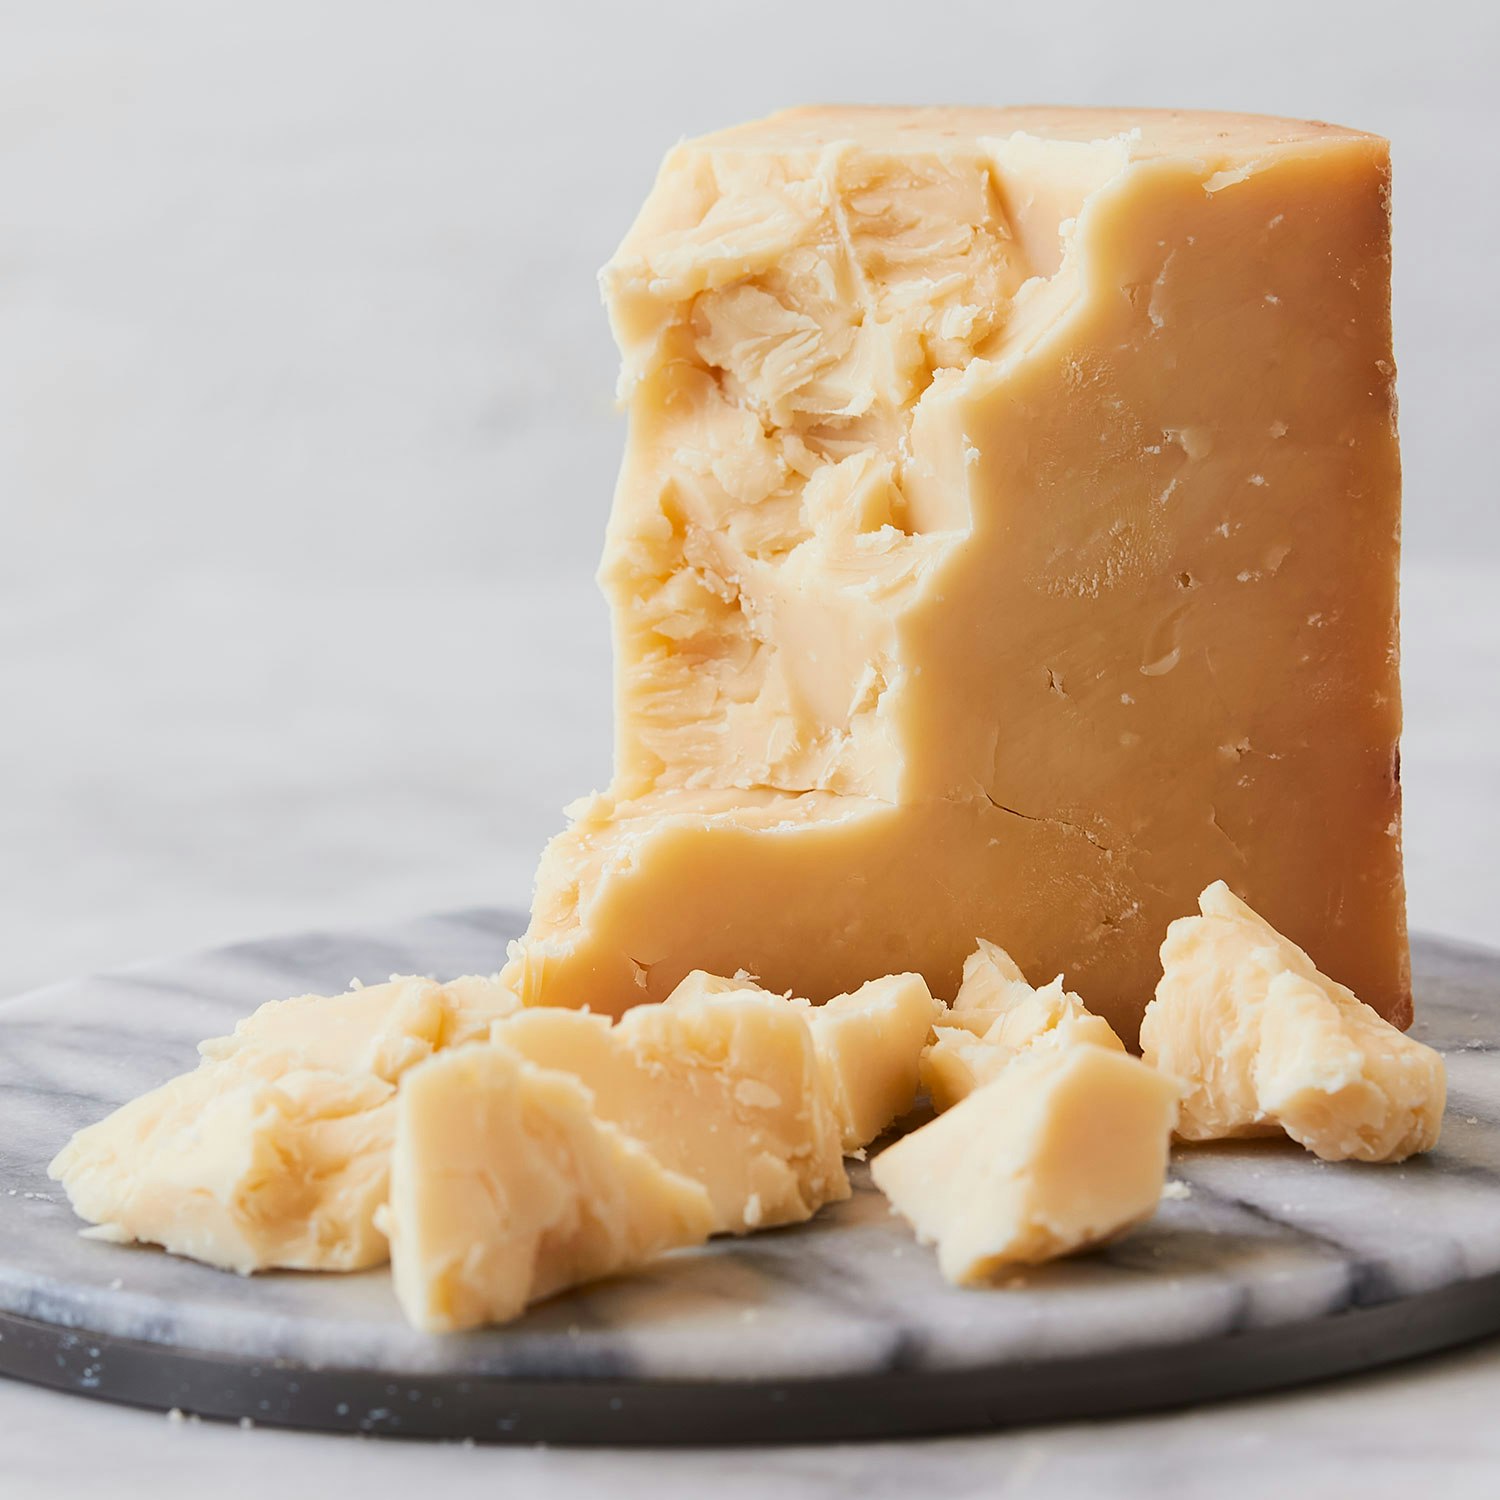 murrays cave aged original stockinghall cheddar cheese